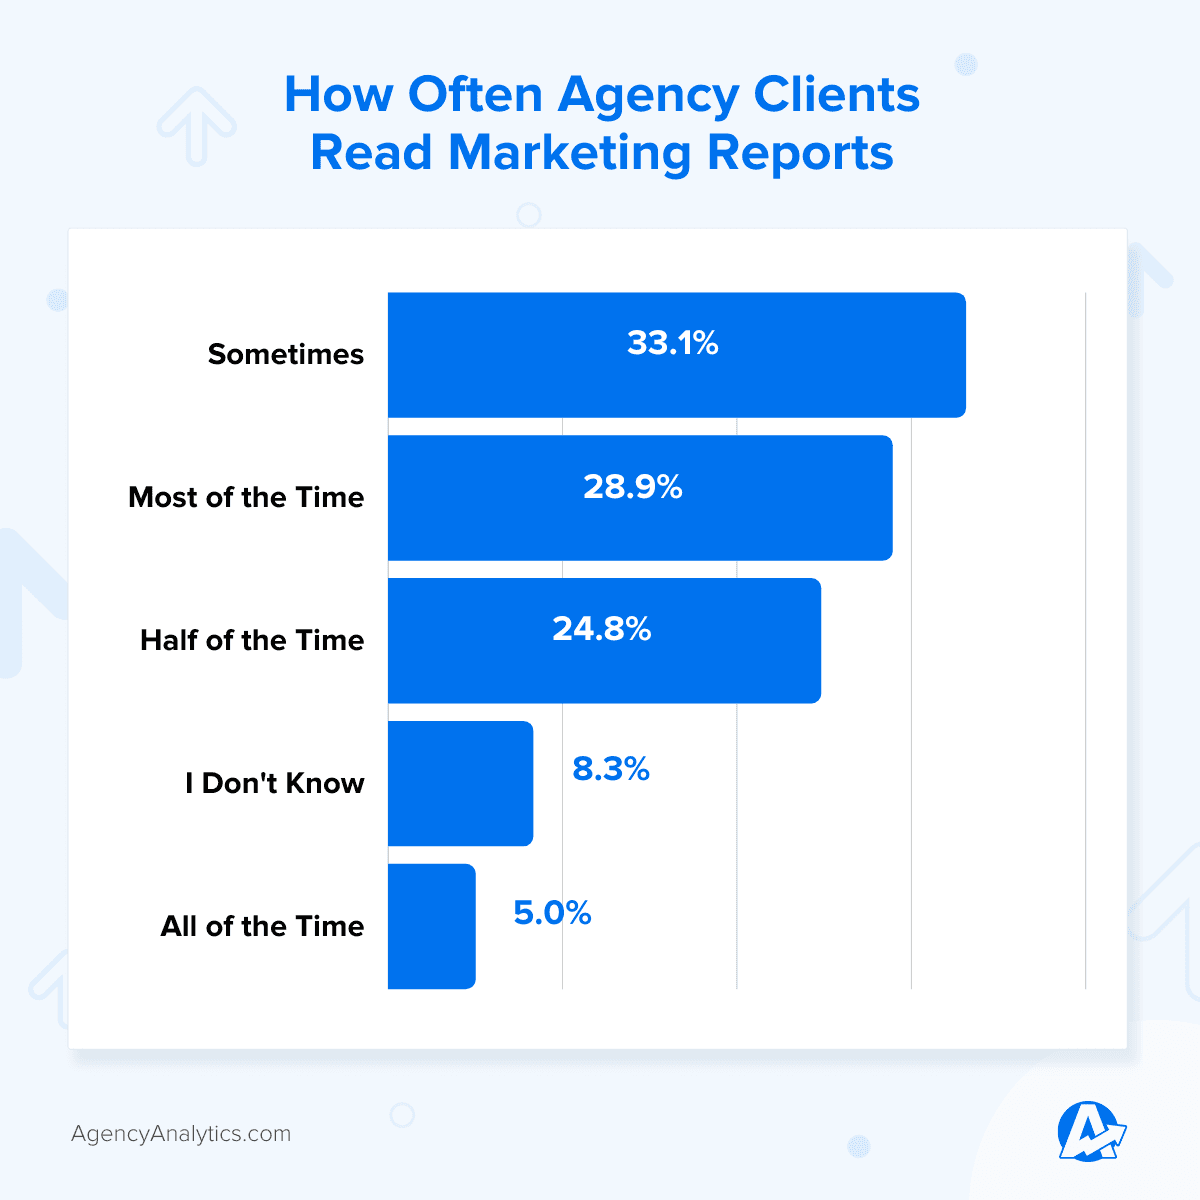 A graph illustrating how often agency clients read the marketing reports created by the agency, which is one of the leading indicators of customer retention